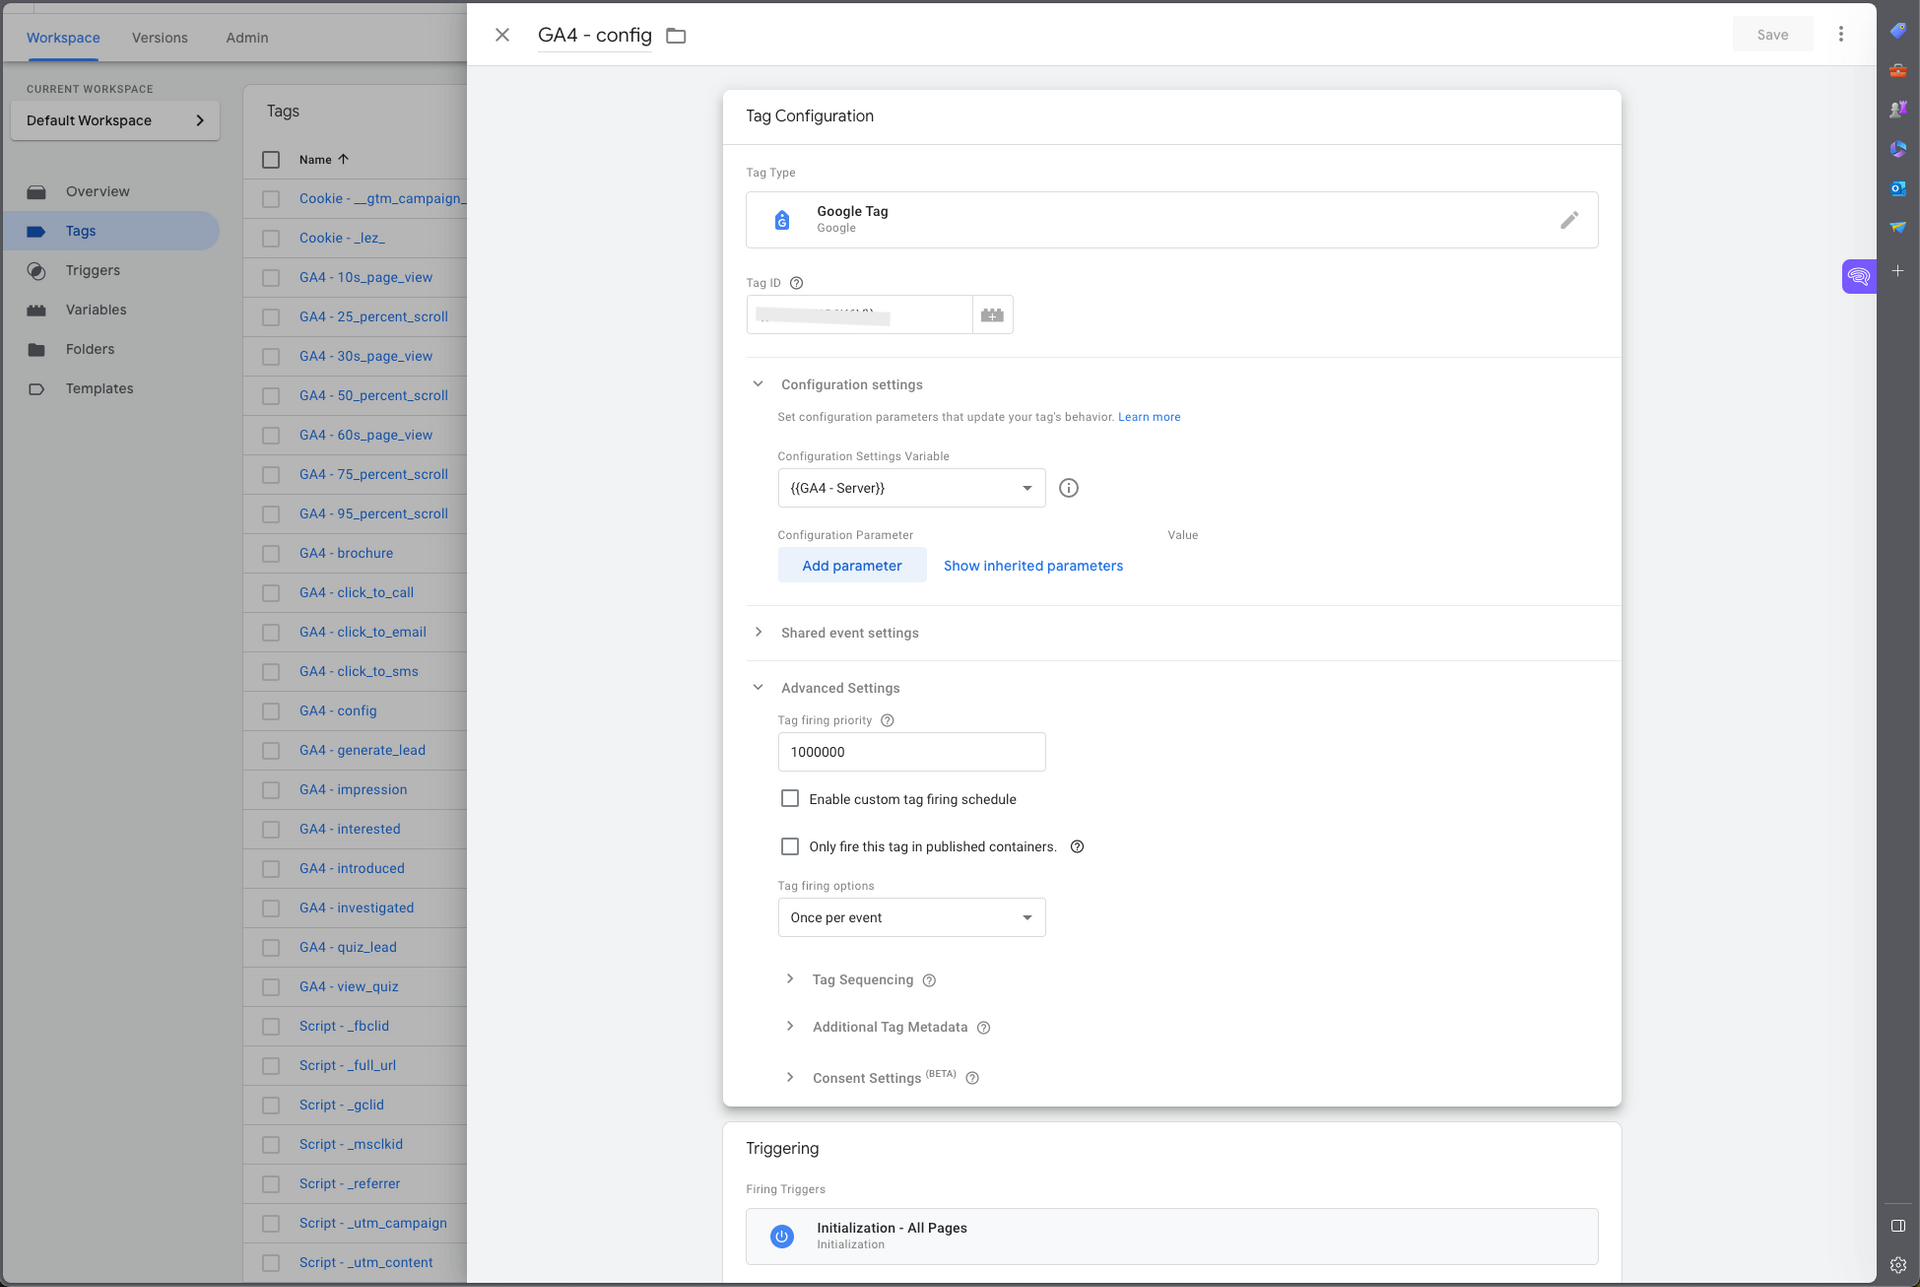 Screenshot of Google Tag Manager showing the GA4 configuration tag.